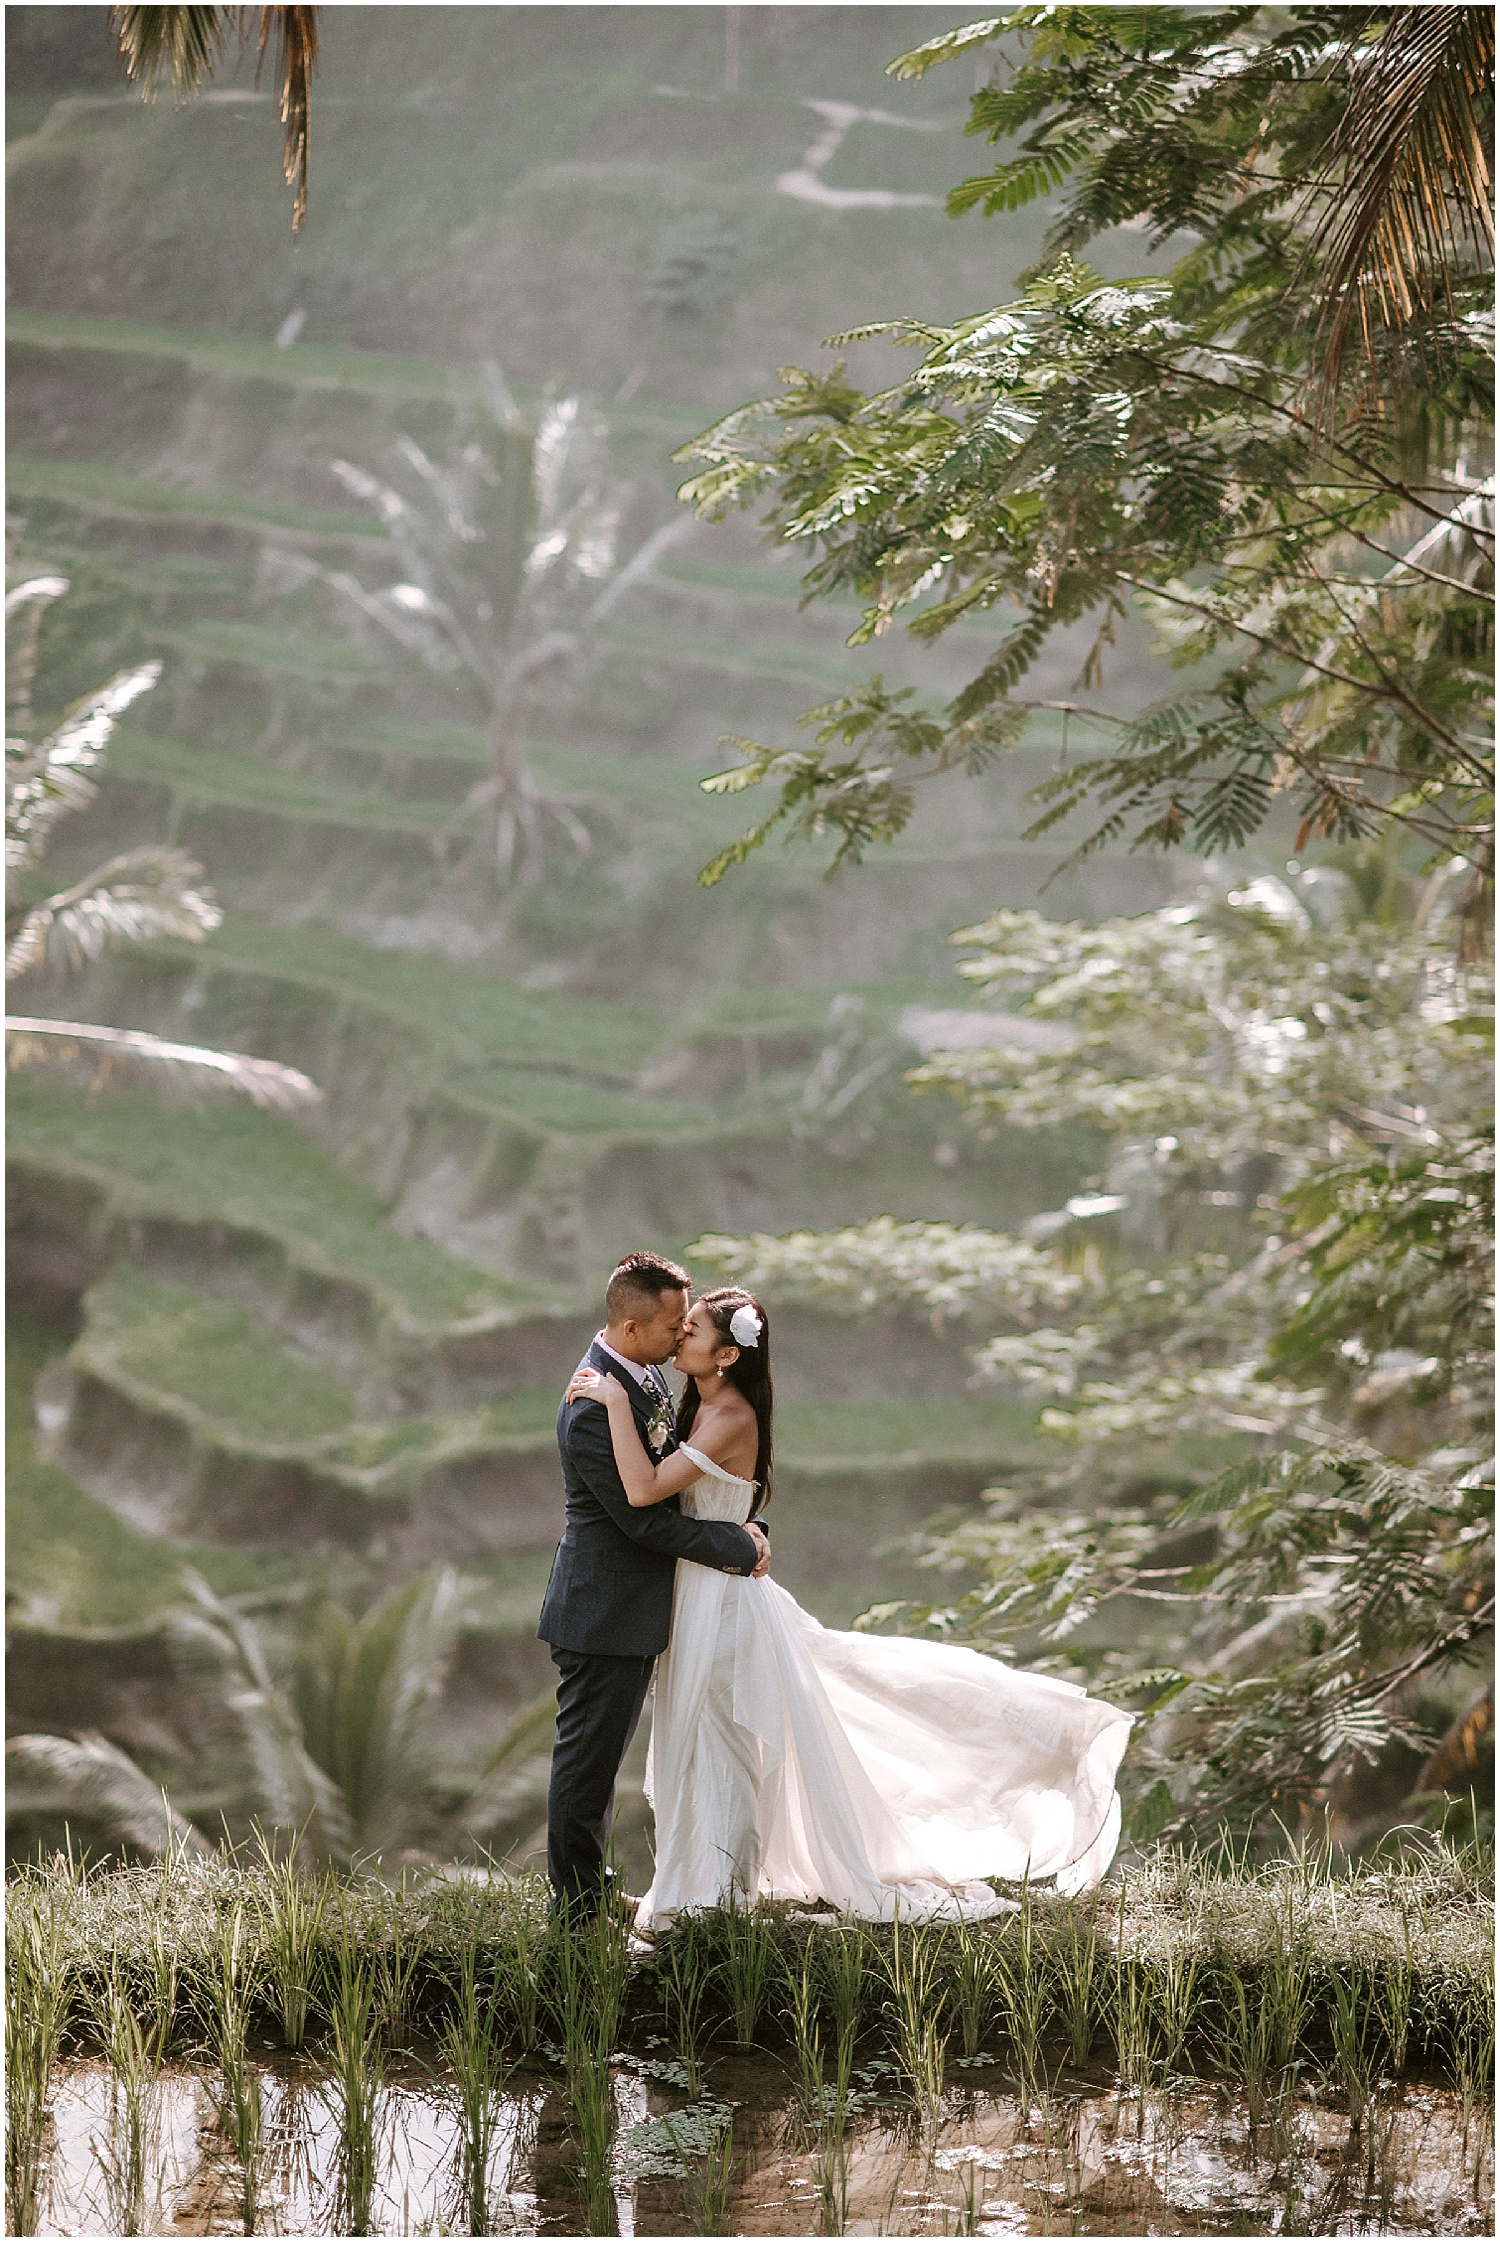 canadian couple elopement at Tegallalang Rice Terraces in ubud Bali